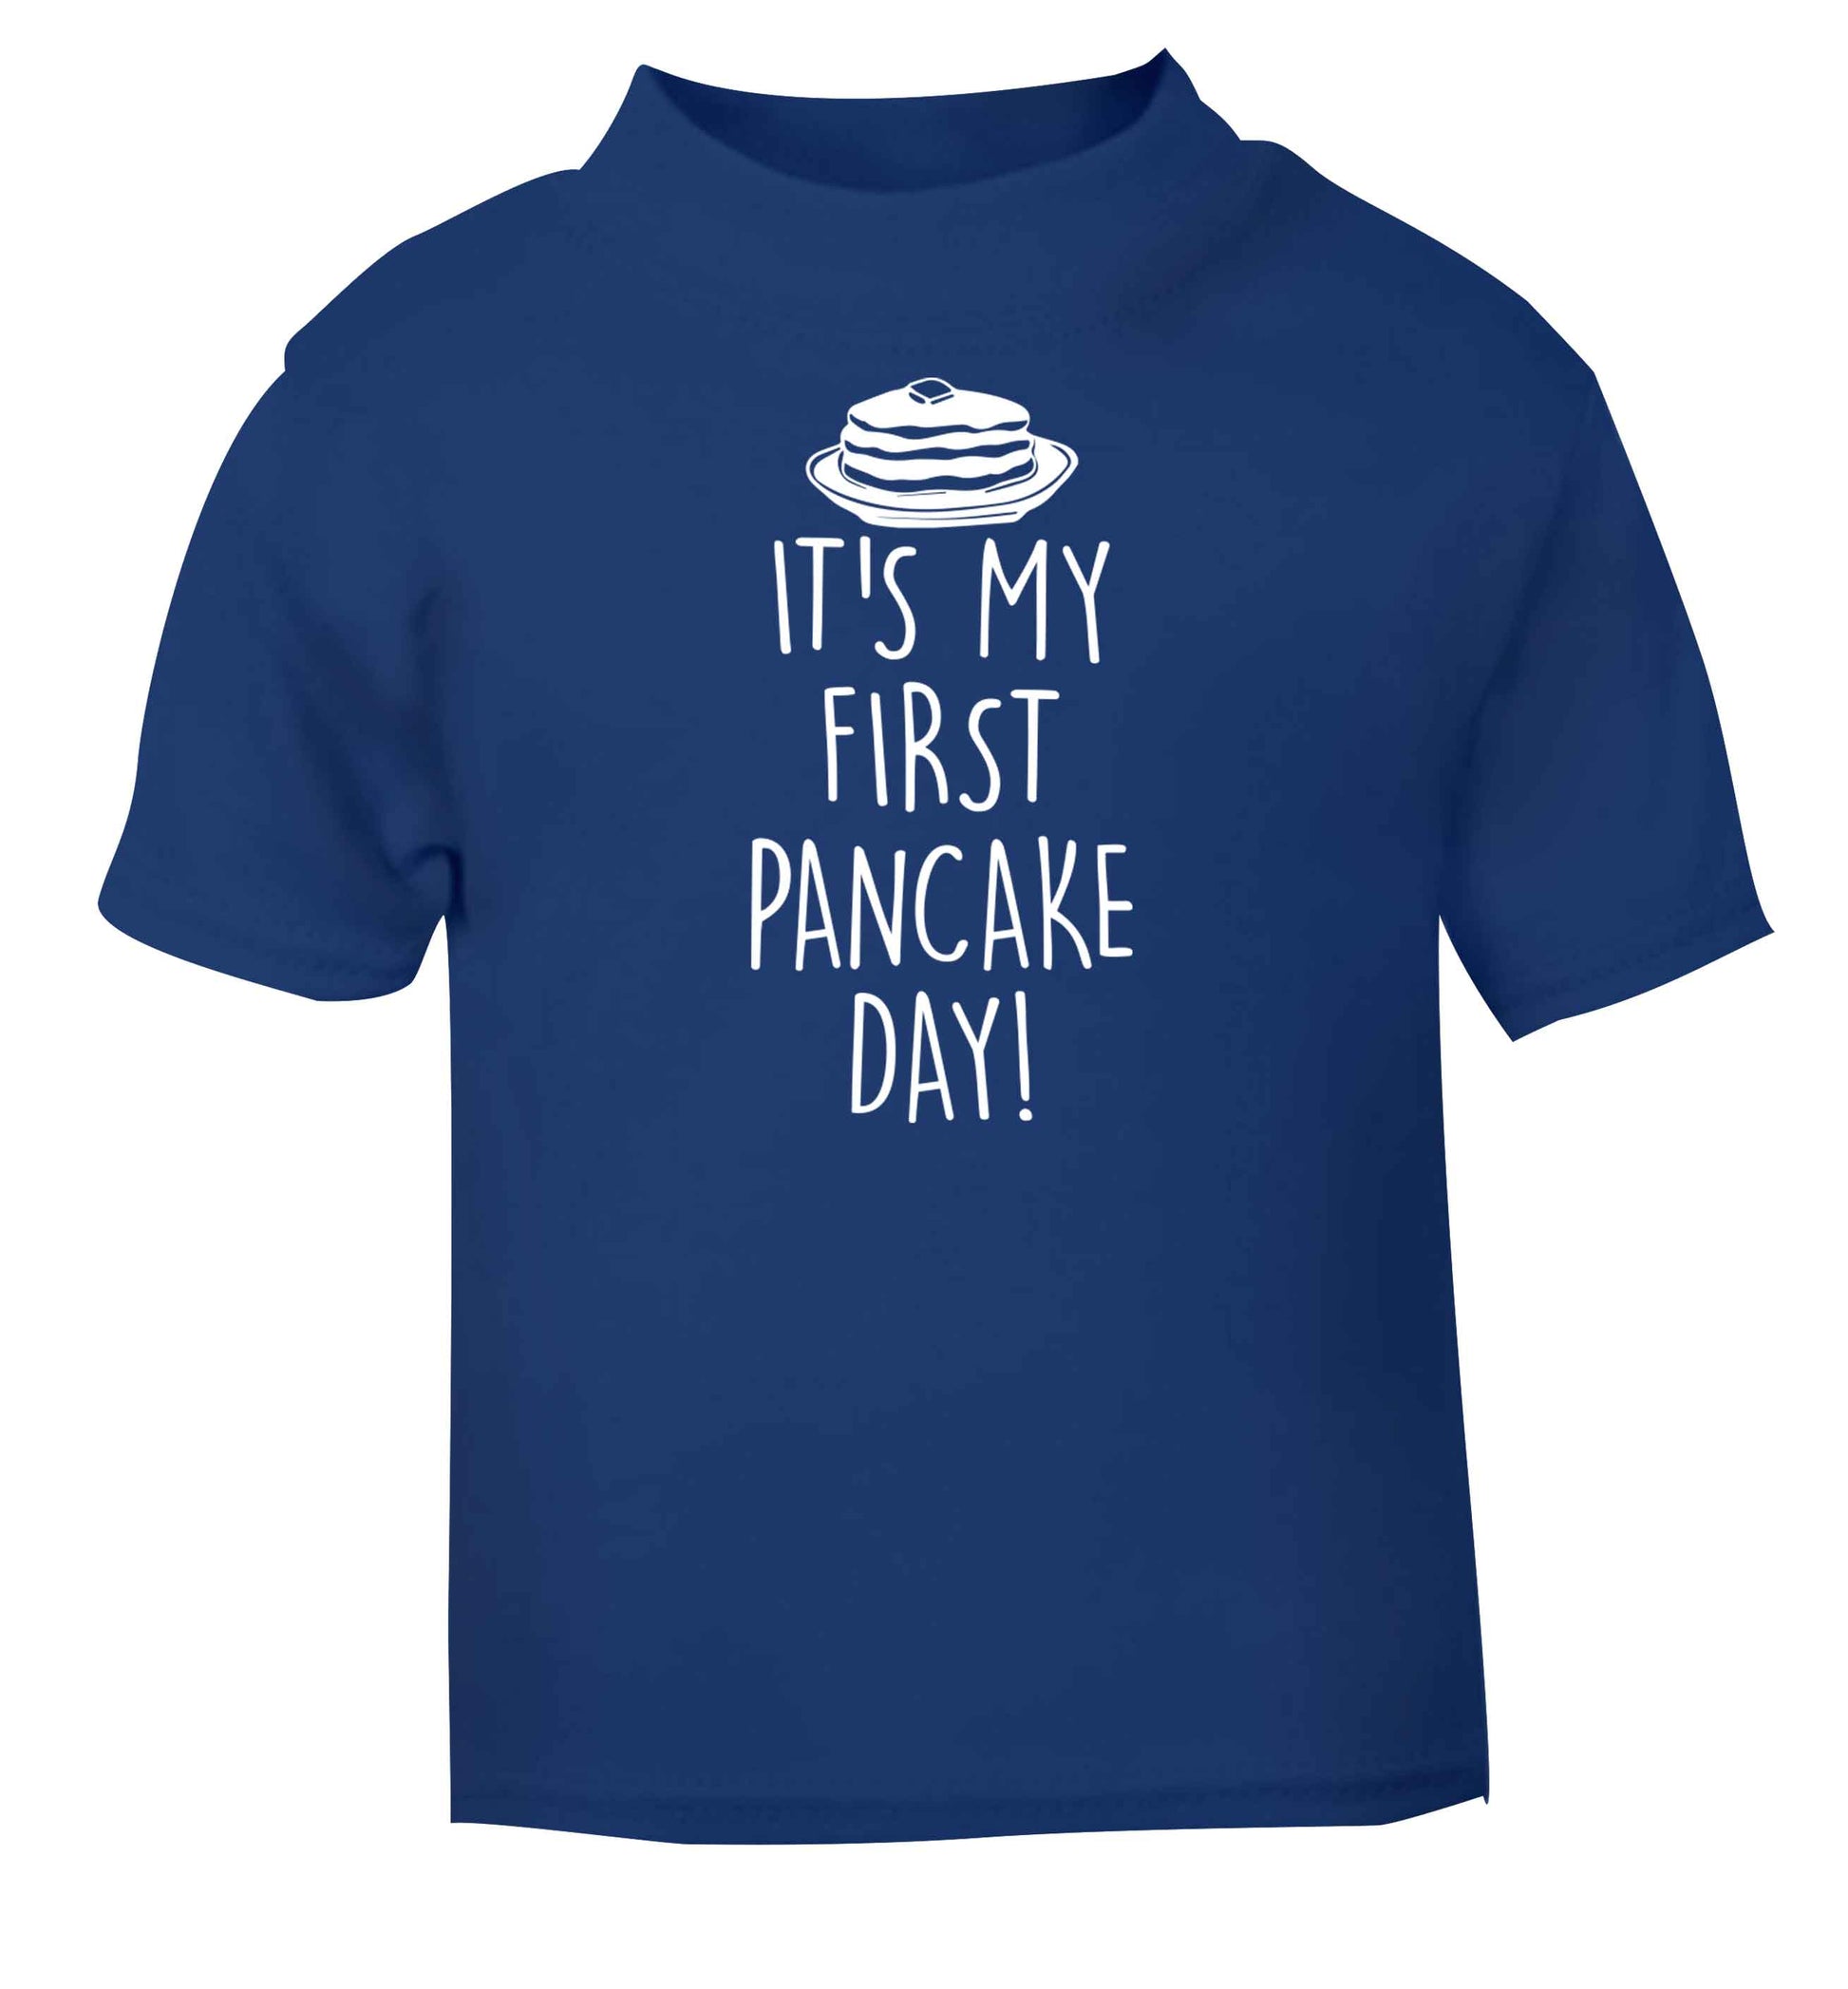 It's my first pancake day blue baby toddler Tshirt 2 Years